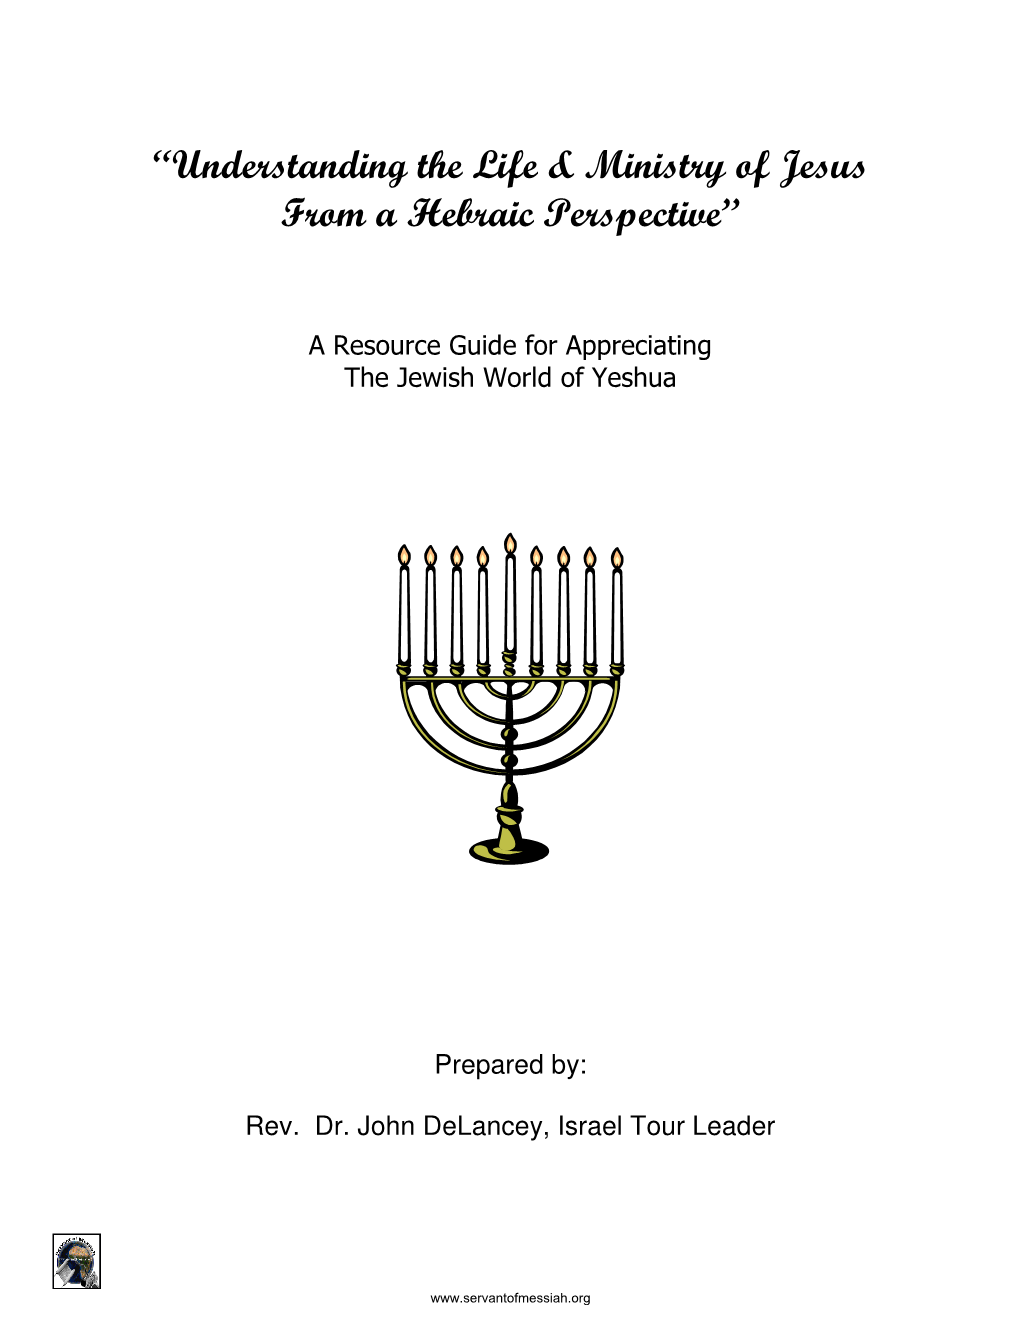 “Understanding the Life & Ministry of Jesus from a Hebraic Perspective”